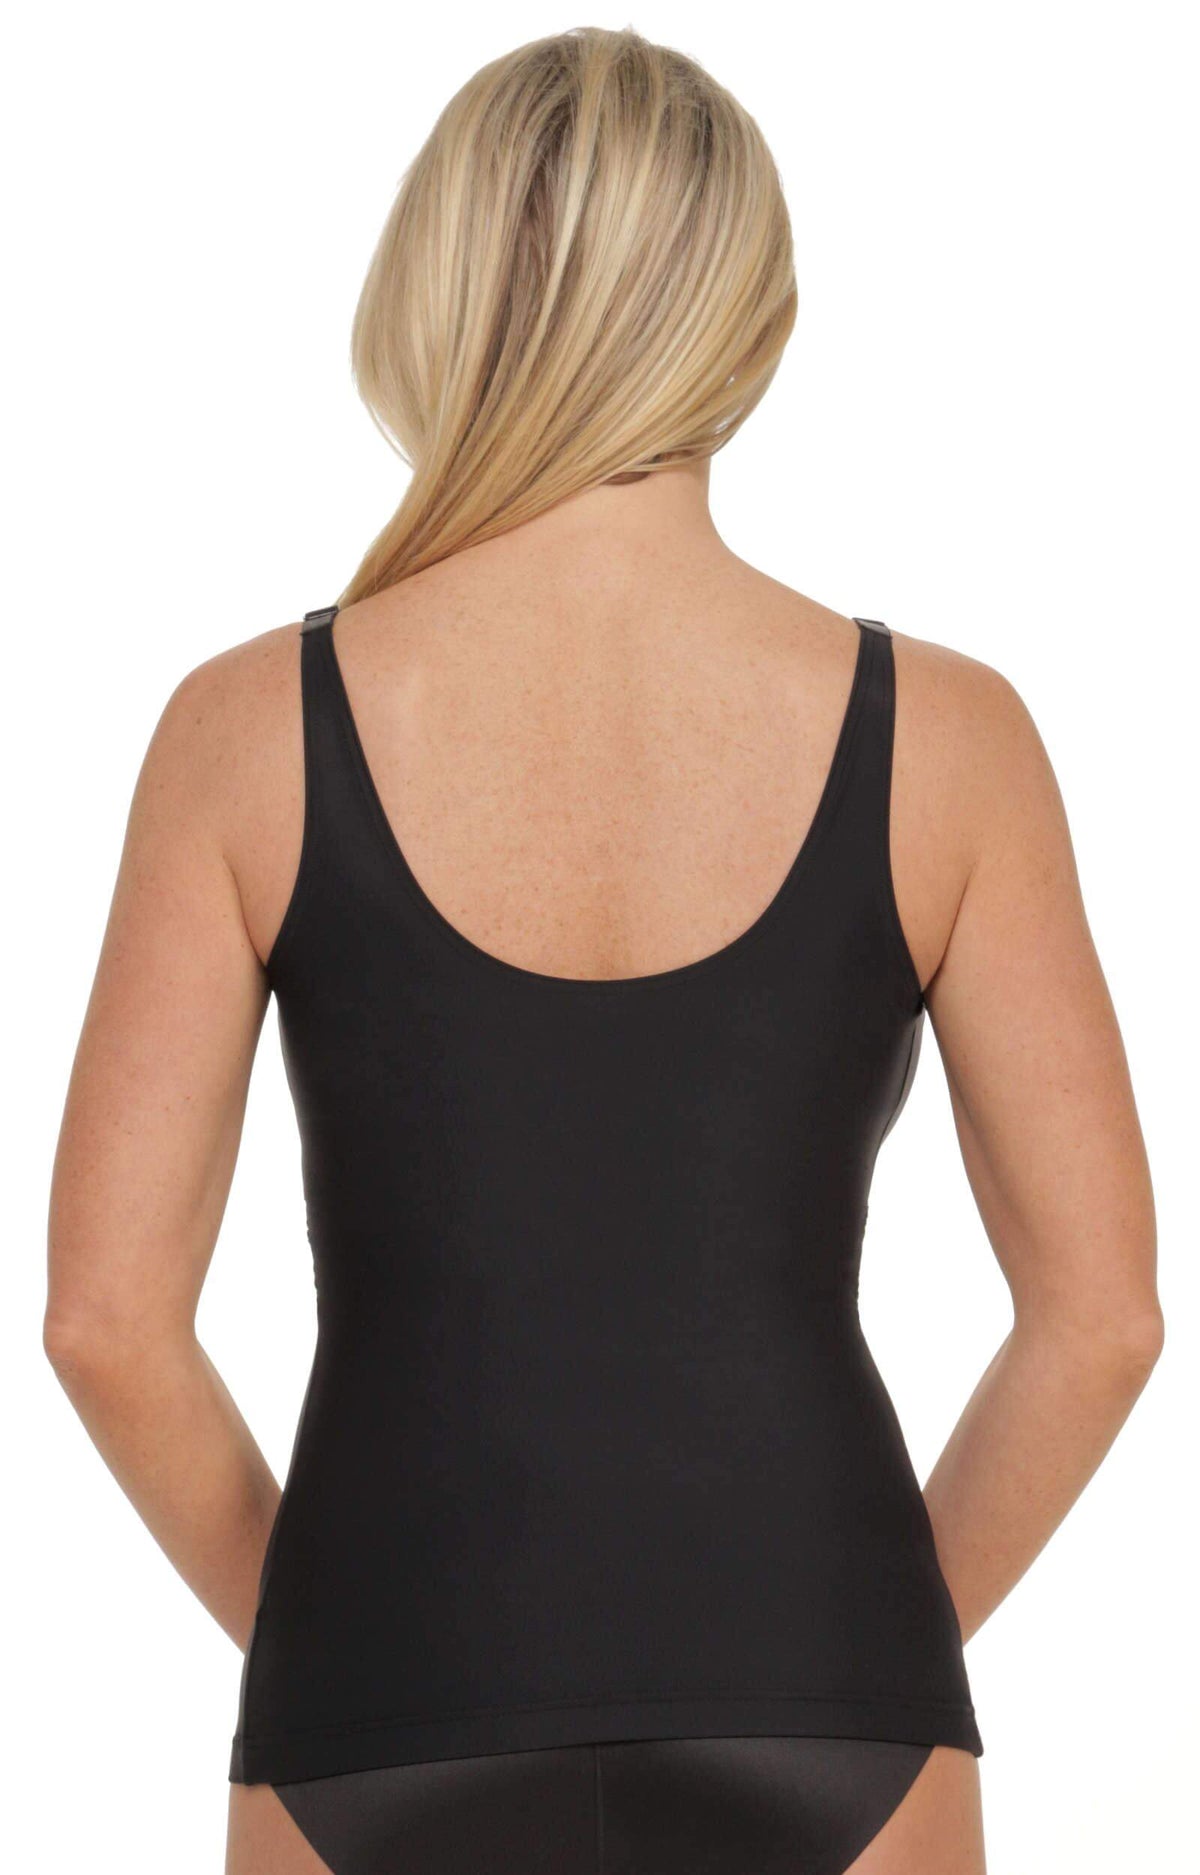 View Shapeez extensive collection of back smoothing bras and shaping  solutions for all body types